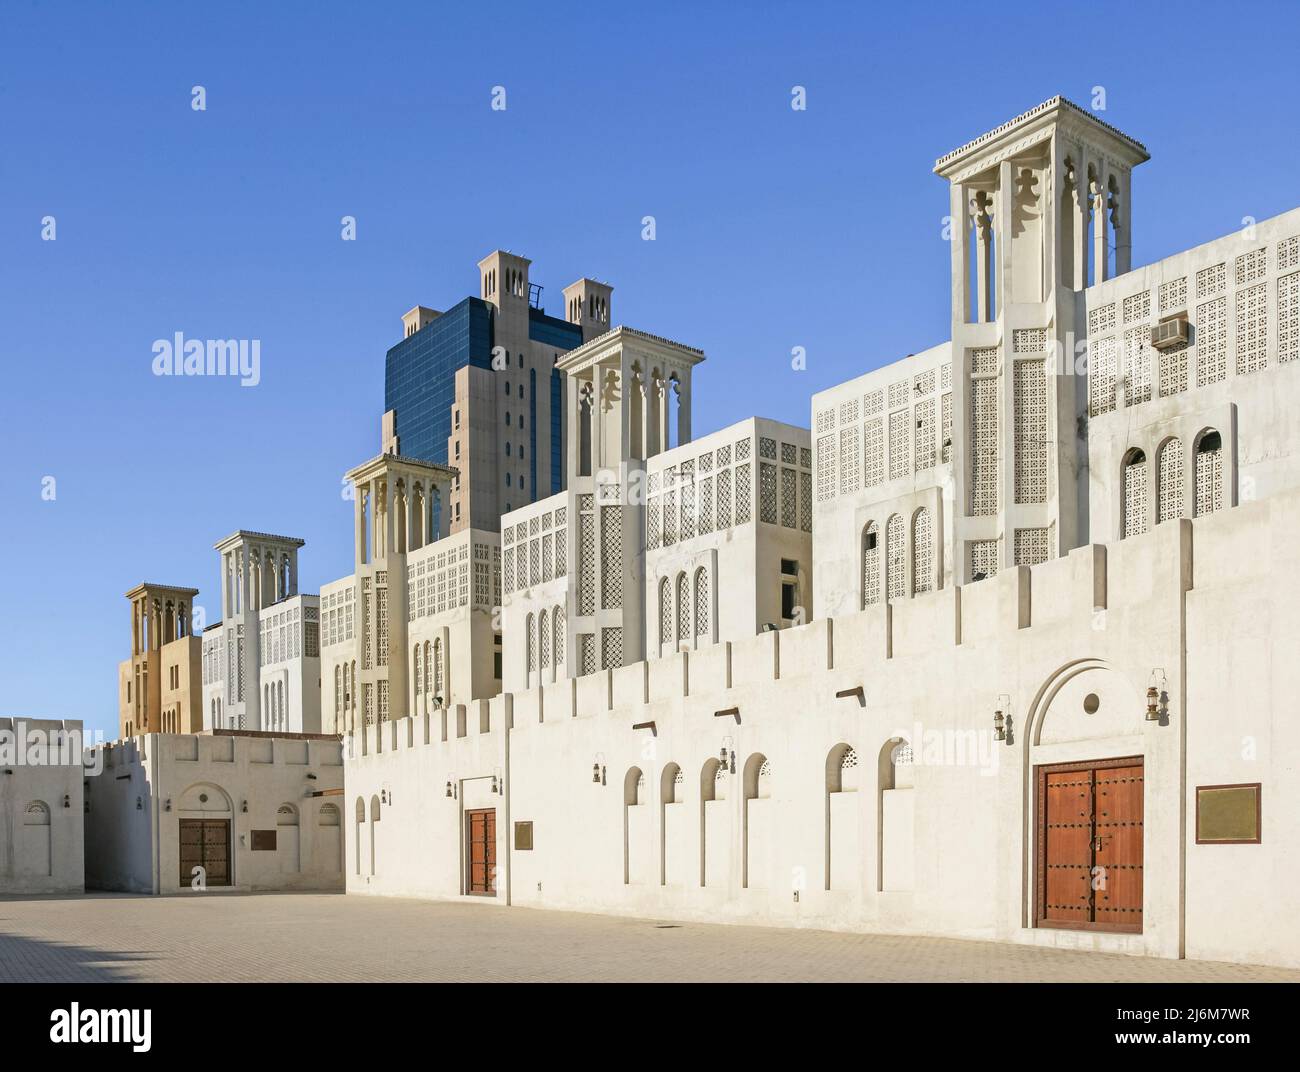 The city of Sharjah's restored Heritage Area in the United Arab Emirates, with a more modern Arabian-styled building in the background. Stock Photo